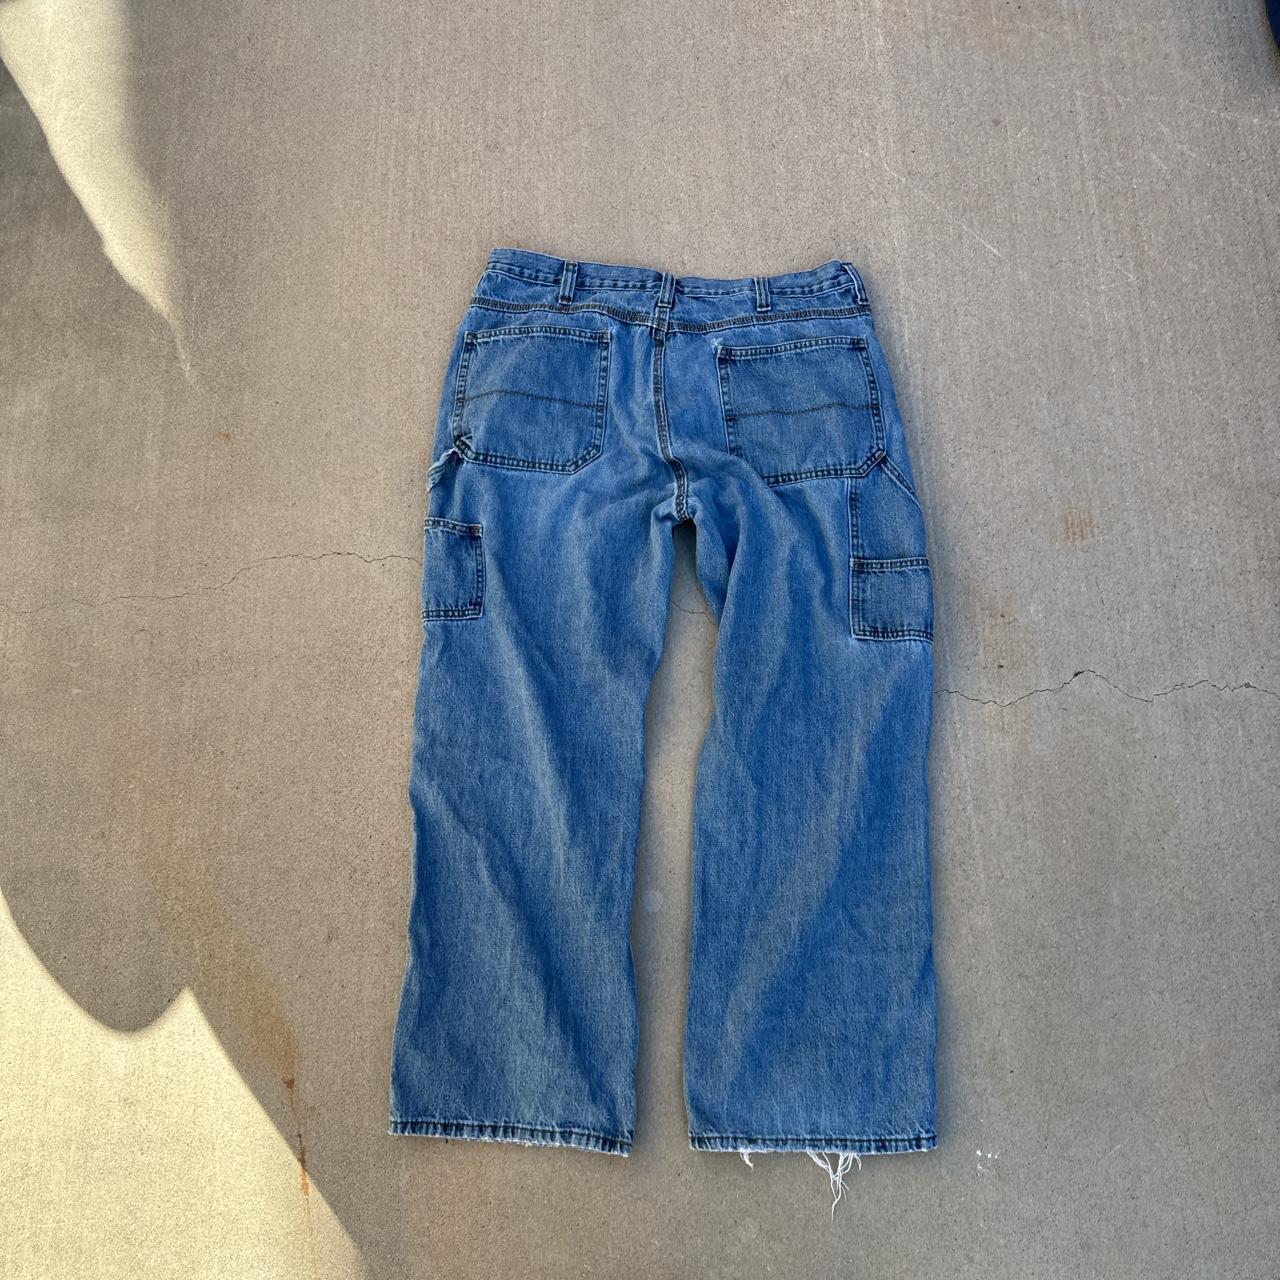 Perfect Wash Faded Glory Carpenter Jeans With Very Depop